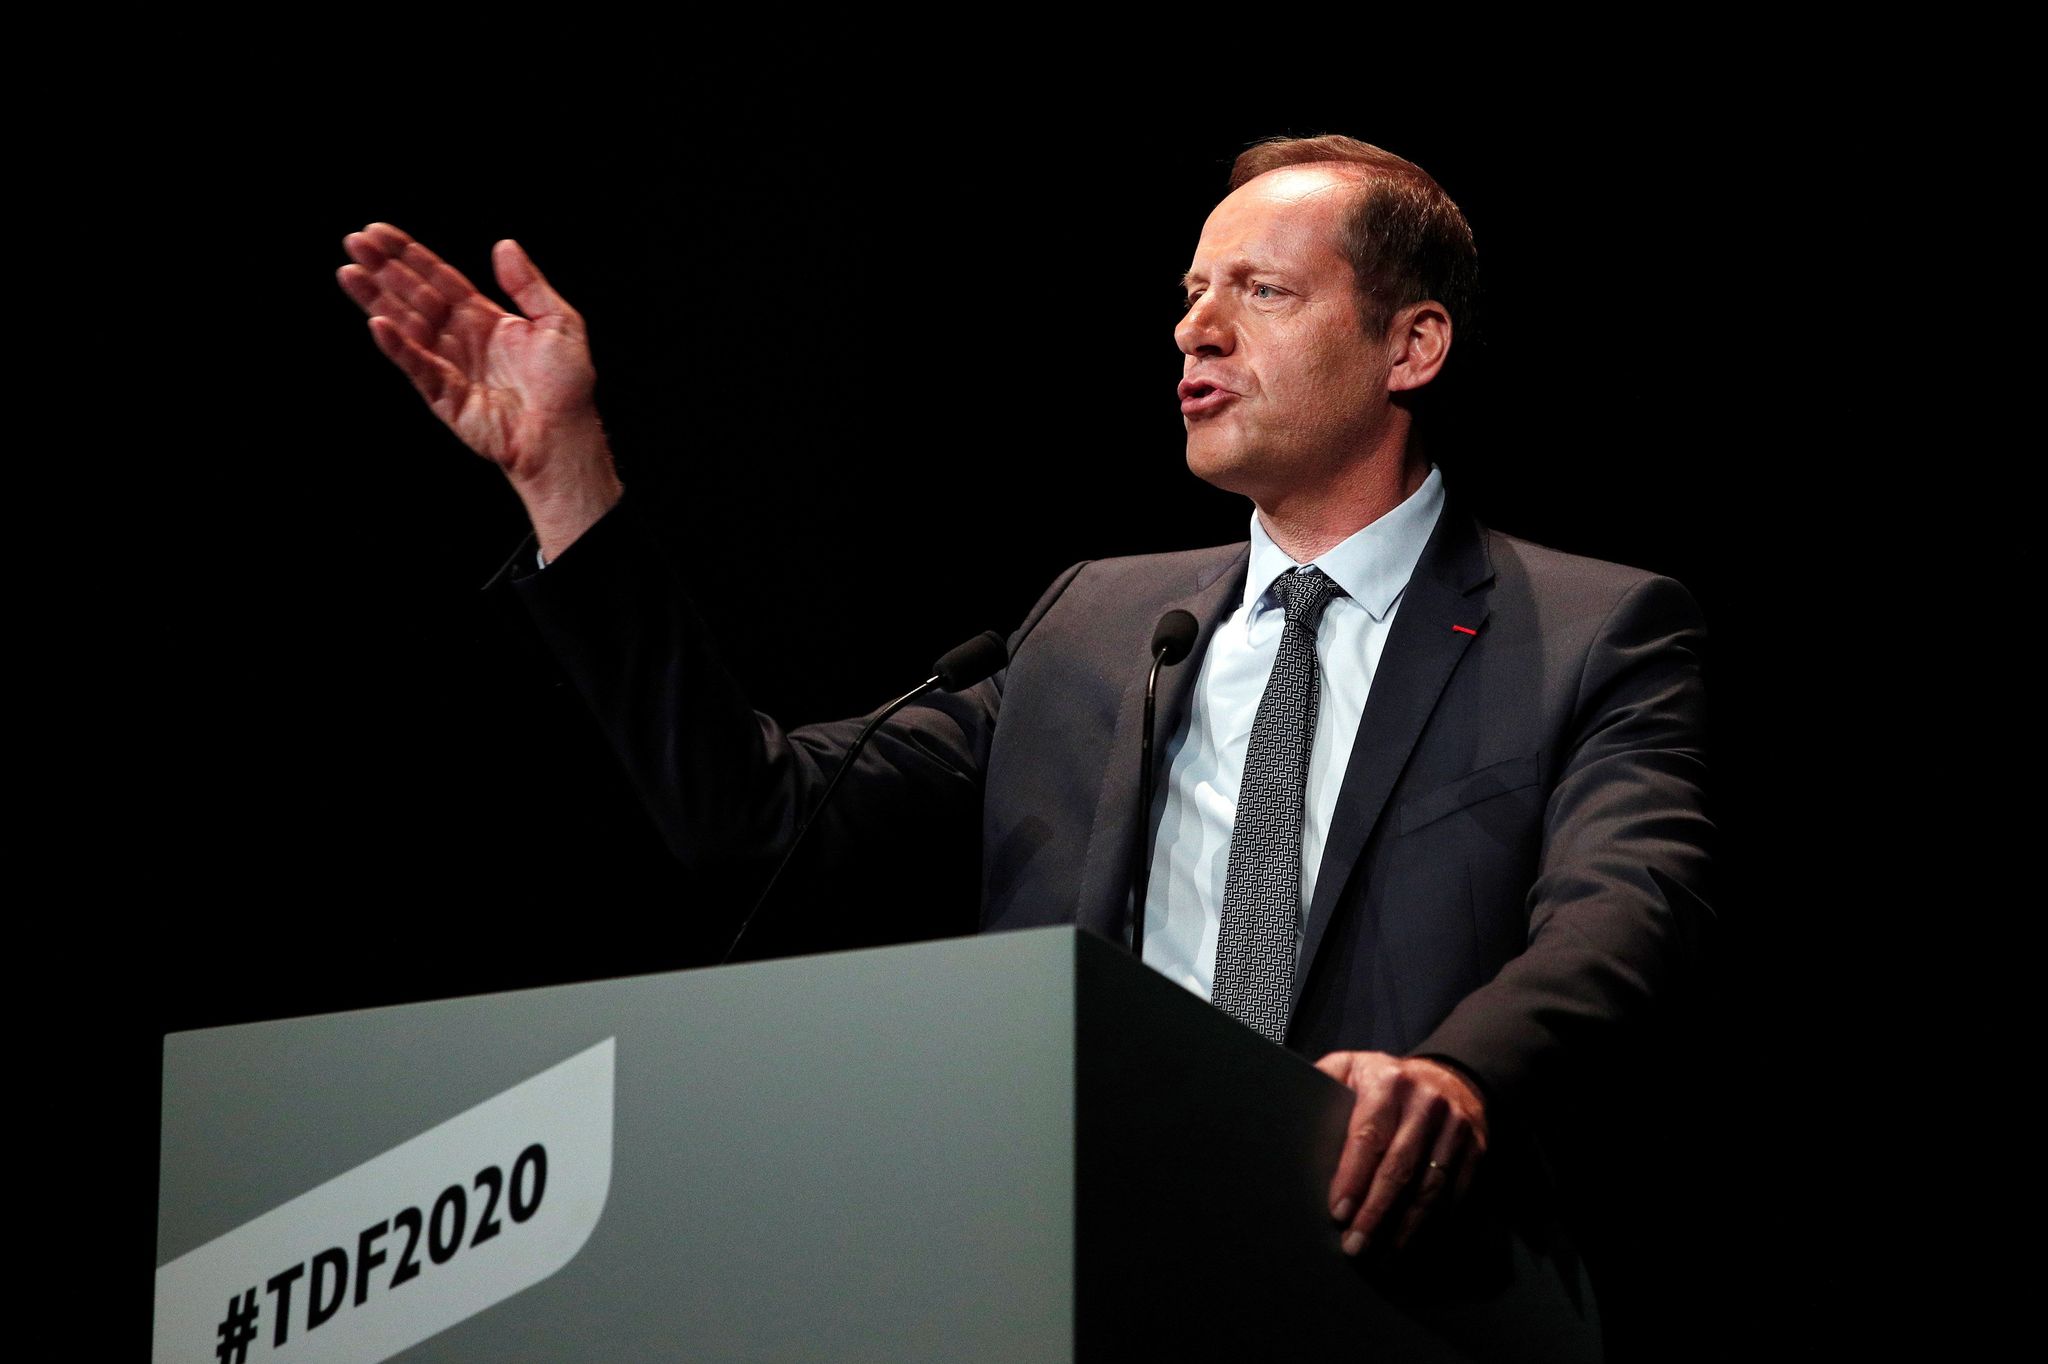 Paris (France), 15/10/2019.- <HIT>Tour</HIT> de France general director Christian Prudhomme delivers his speech during the presentation of the <HIT>Tour</HIT> de France 2020 cycling race in Paris, France, 15 October 2019. The 107th edition of the <HIT>Tour</HIT> de France will start from Nice on 27 June 2020 and will arrive in Paris on 19 July 2020. (Ciclismo, Francia, Niza) EFE/EPA/YOAN VALAT